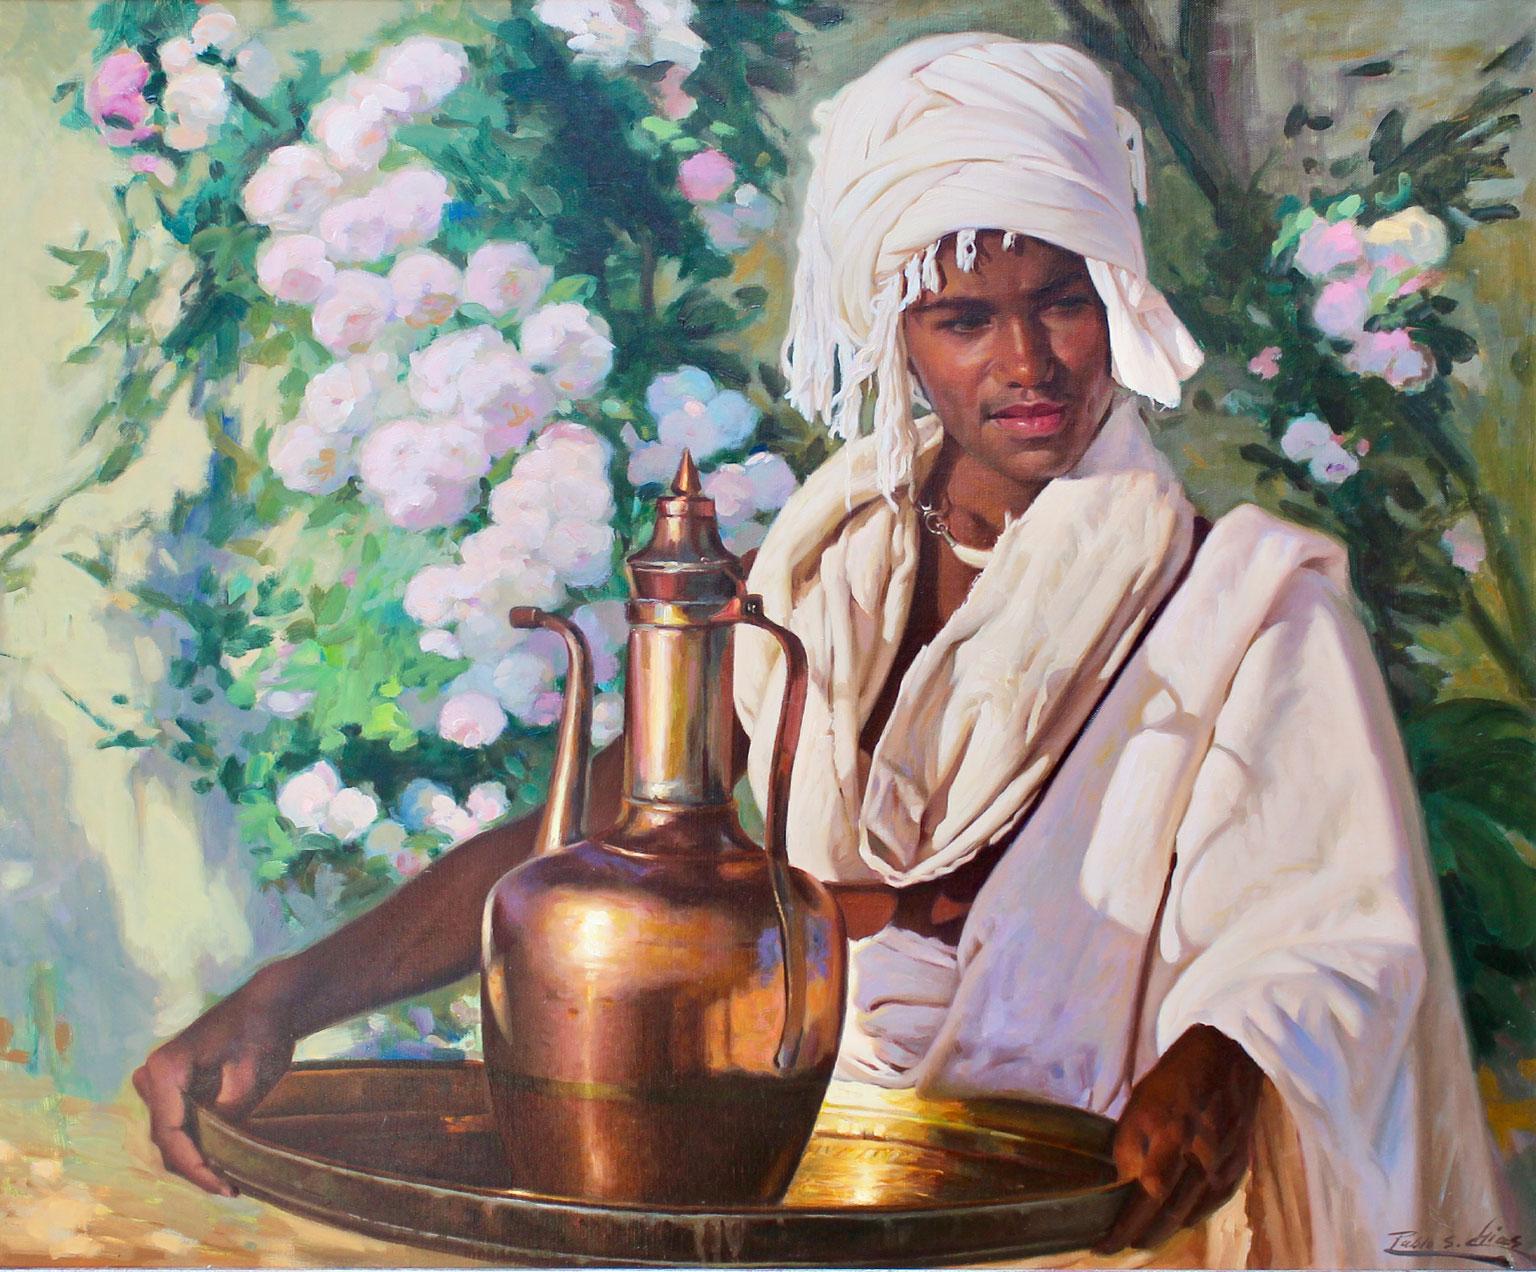 Chías Oil painting on canvas "Oriental Boy" Realism.
Certificate signed by the Author and photographed in his own hand.
Framed dimensions 98 cm x 117 cm / 38.59 in x 46.07 in
image dimensions 73 cm x 92 cm / 28.75 in x 36.23 in

Born at Seville,